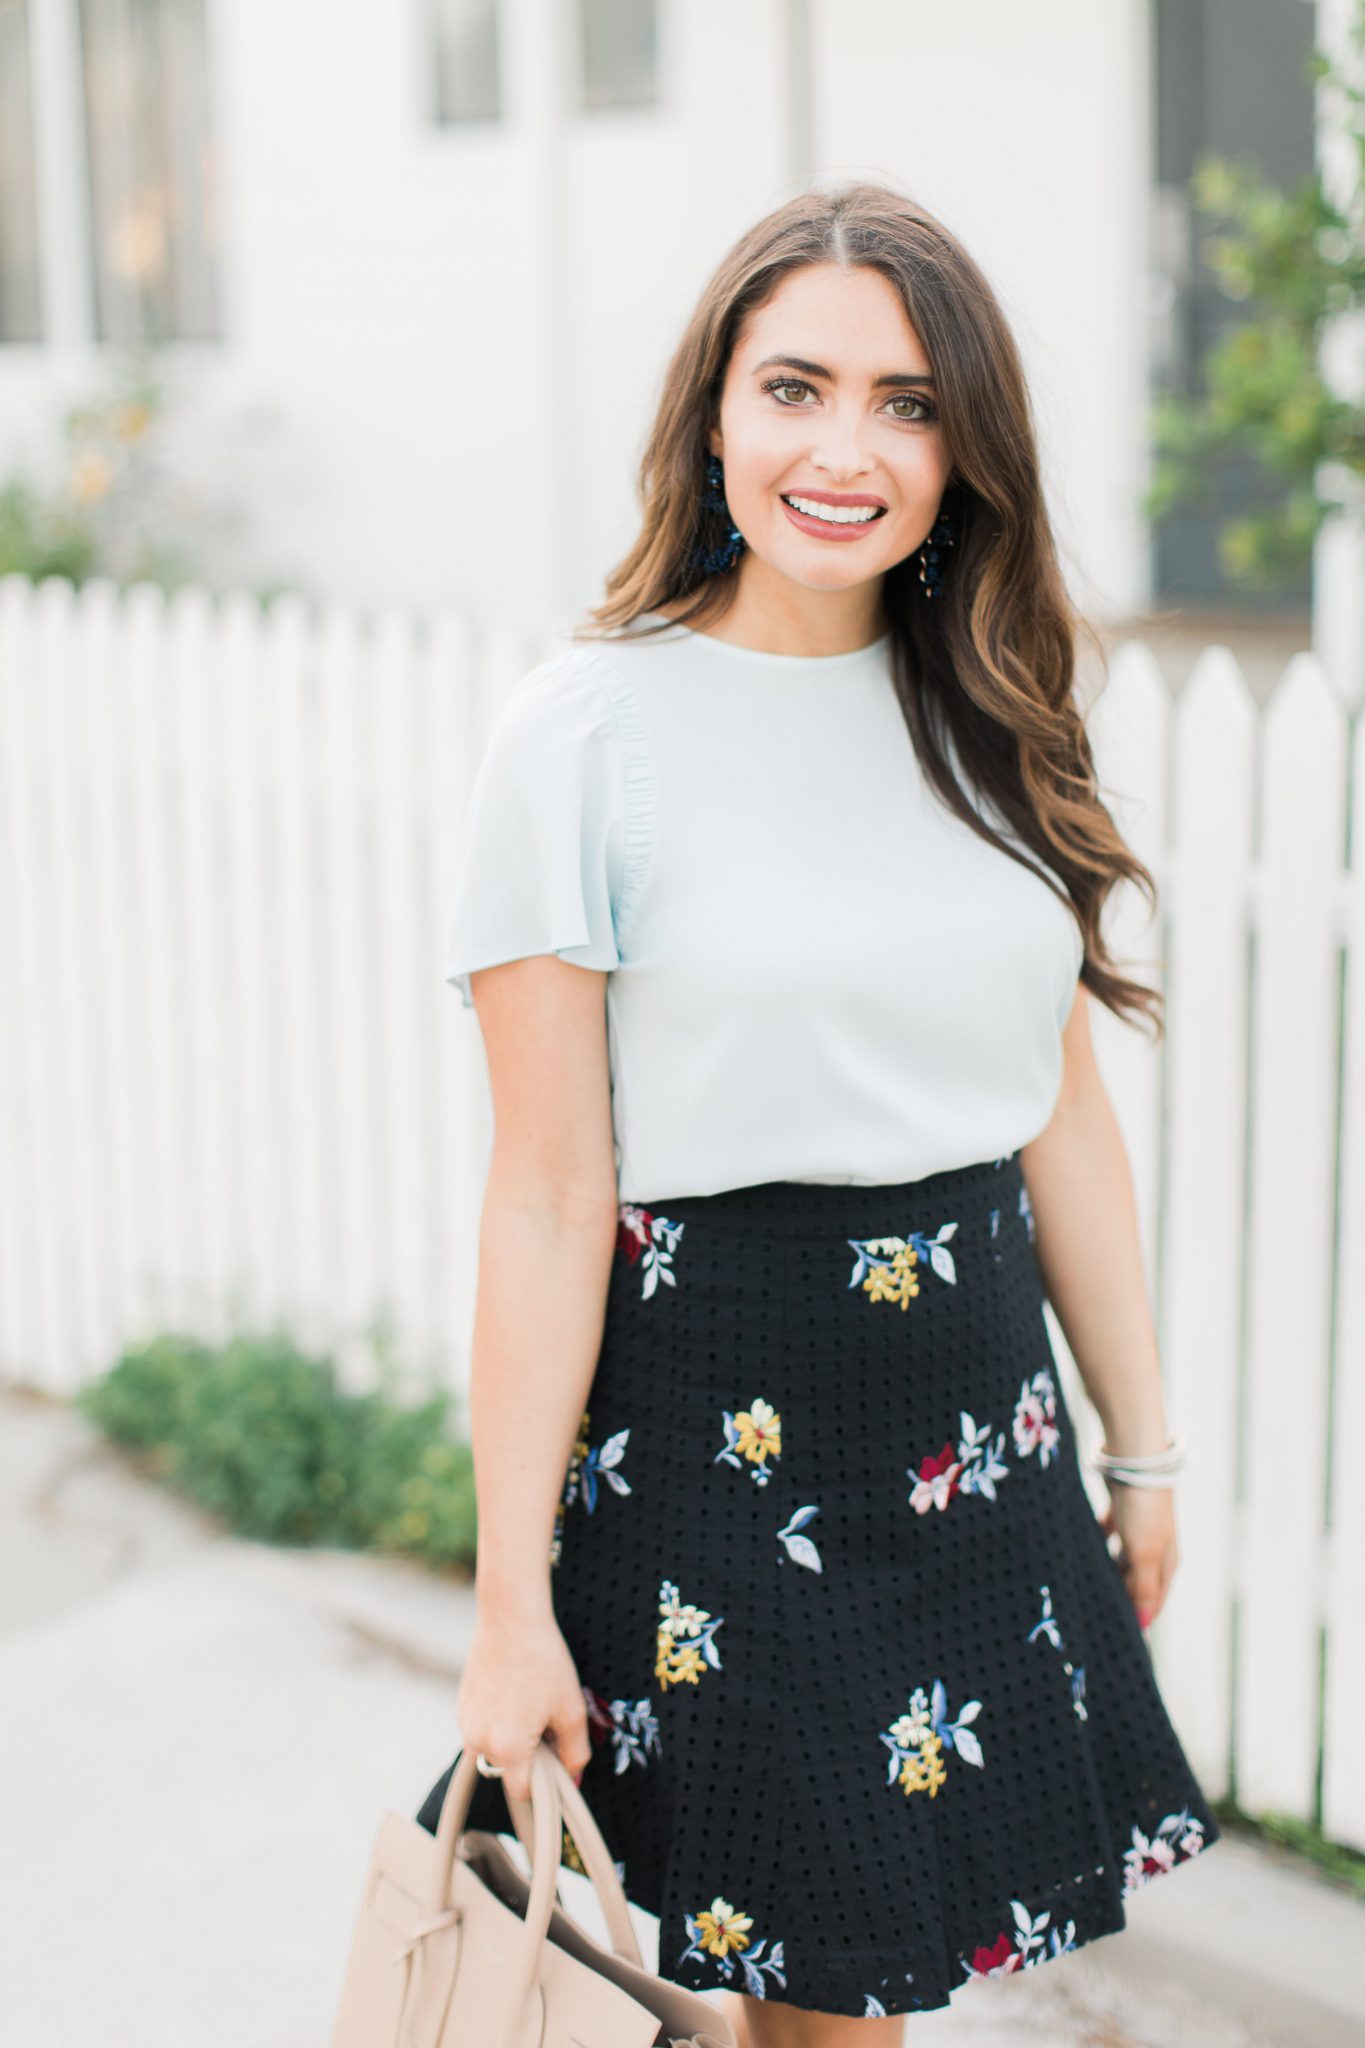 How to Stay Focused at Work by popular Orange County fashion blogger Maxie Elise